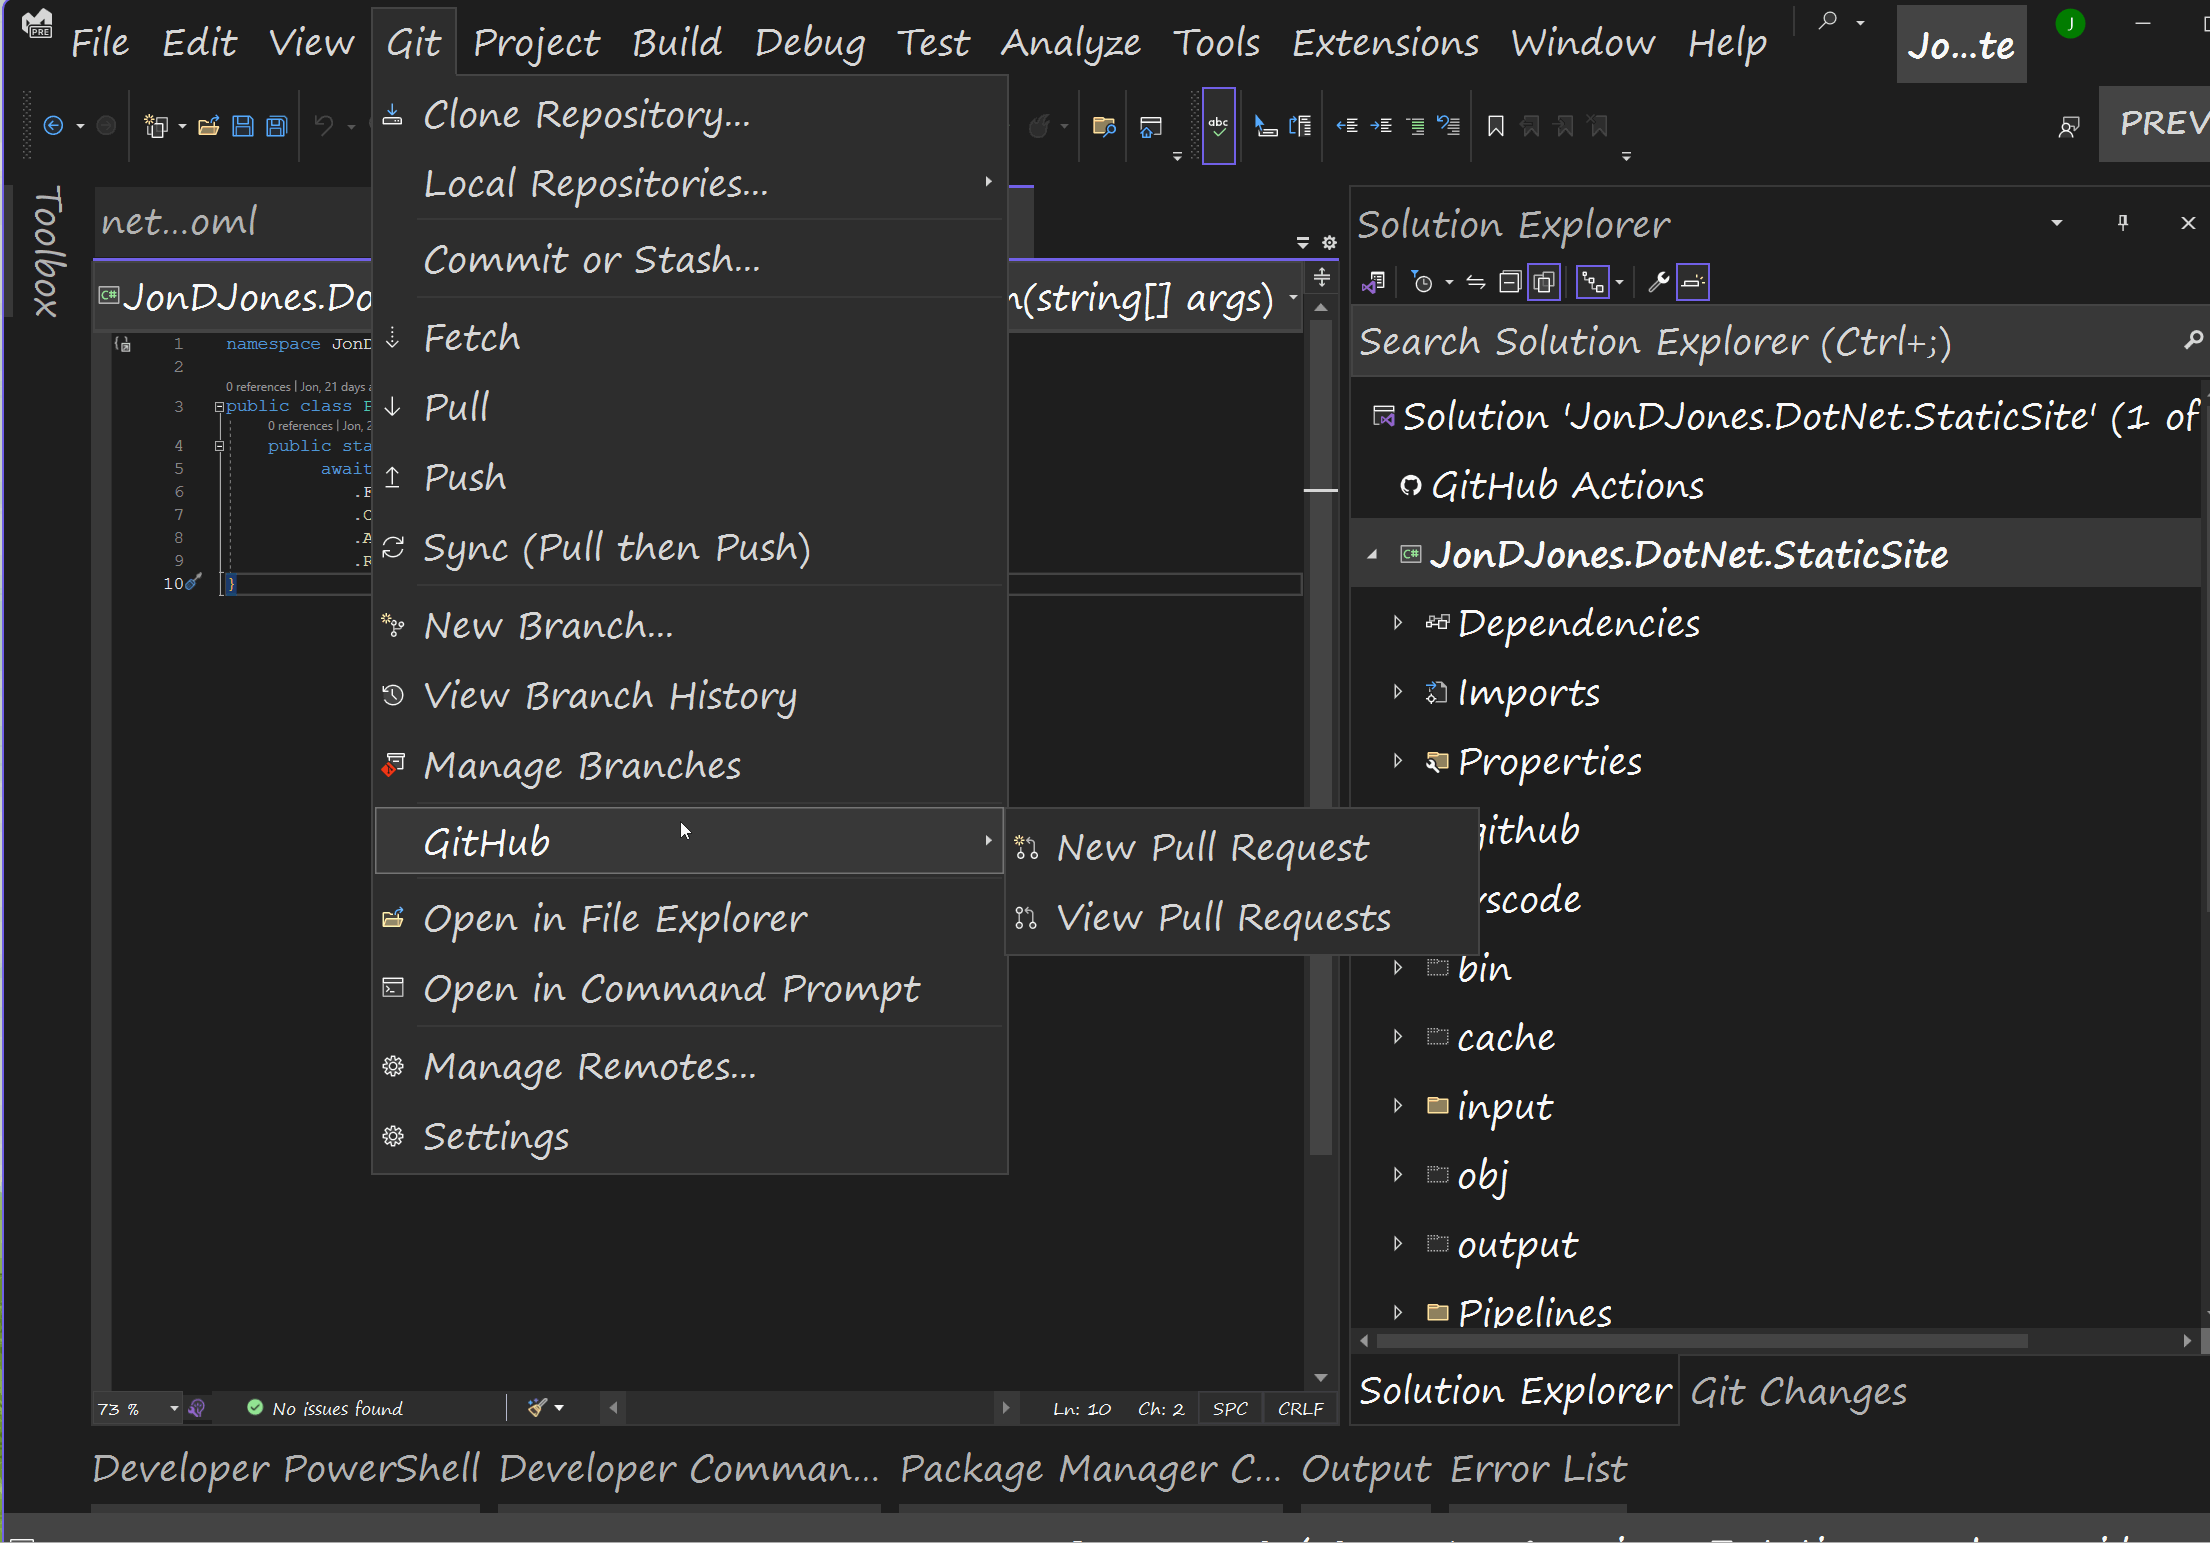 Adding reviews to pull requests in Visual Studio